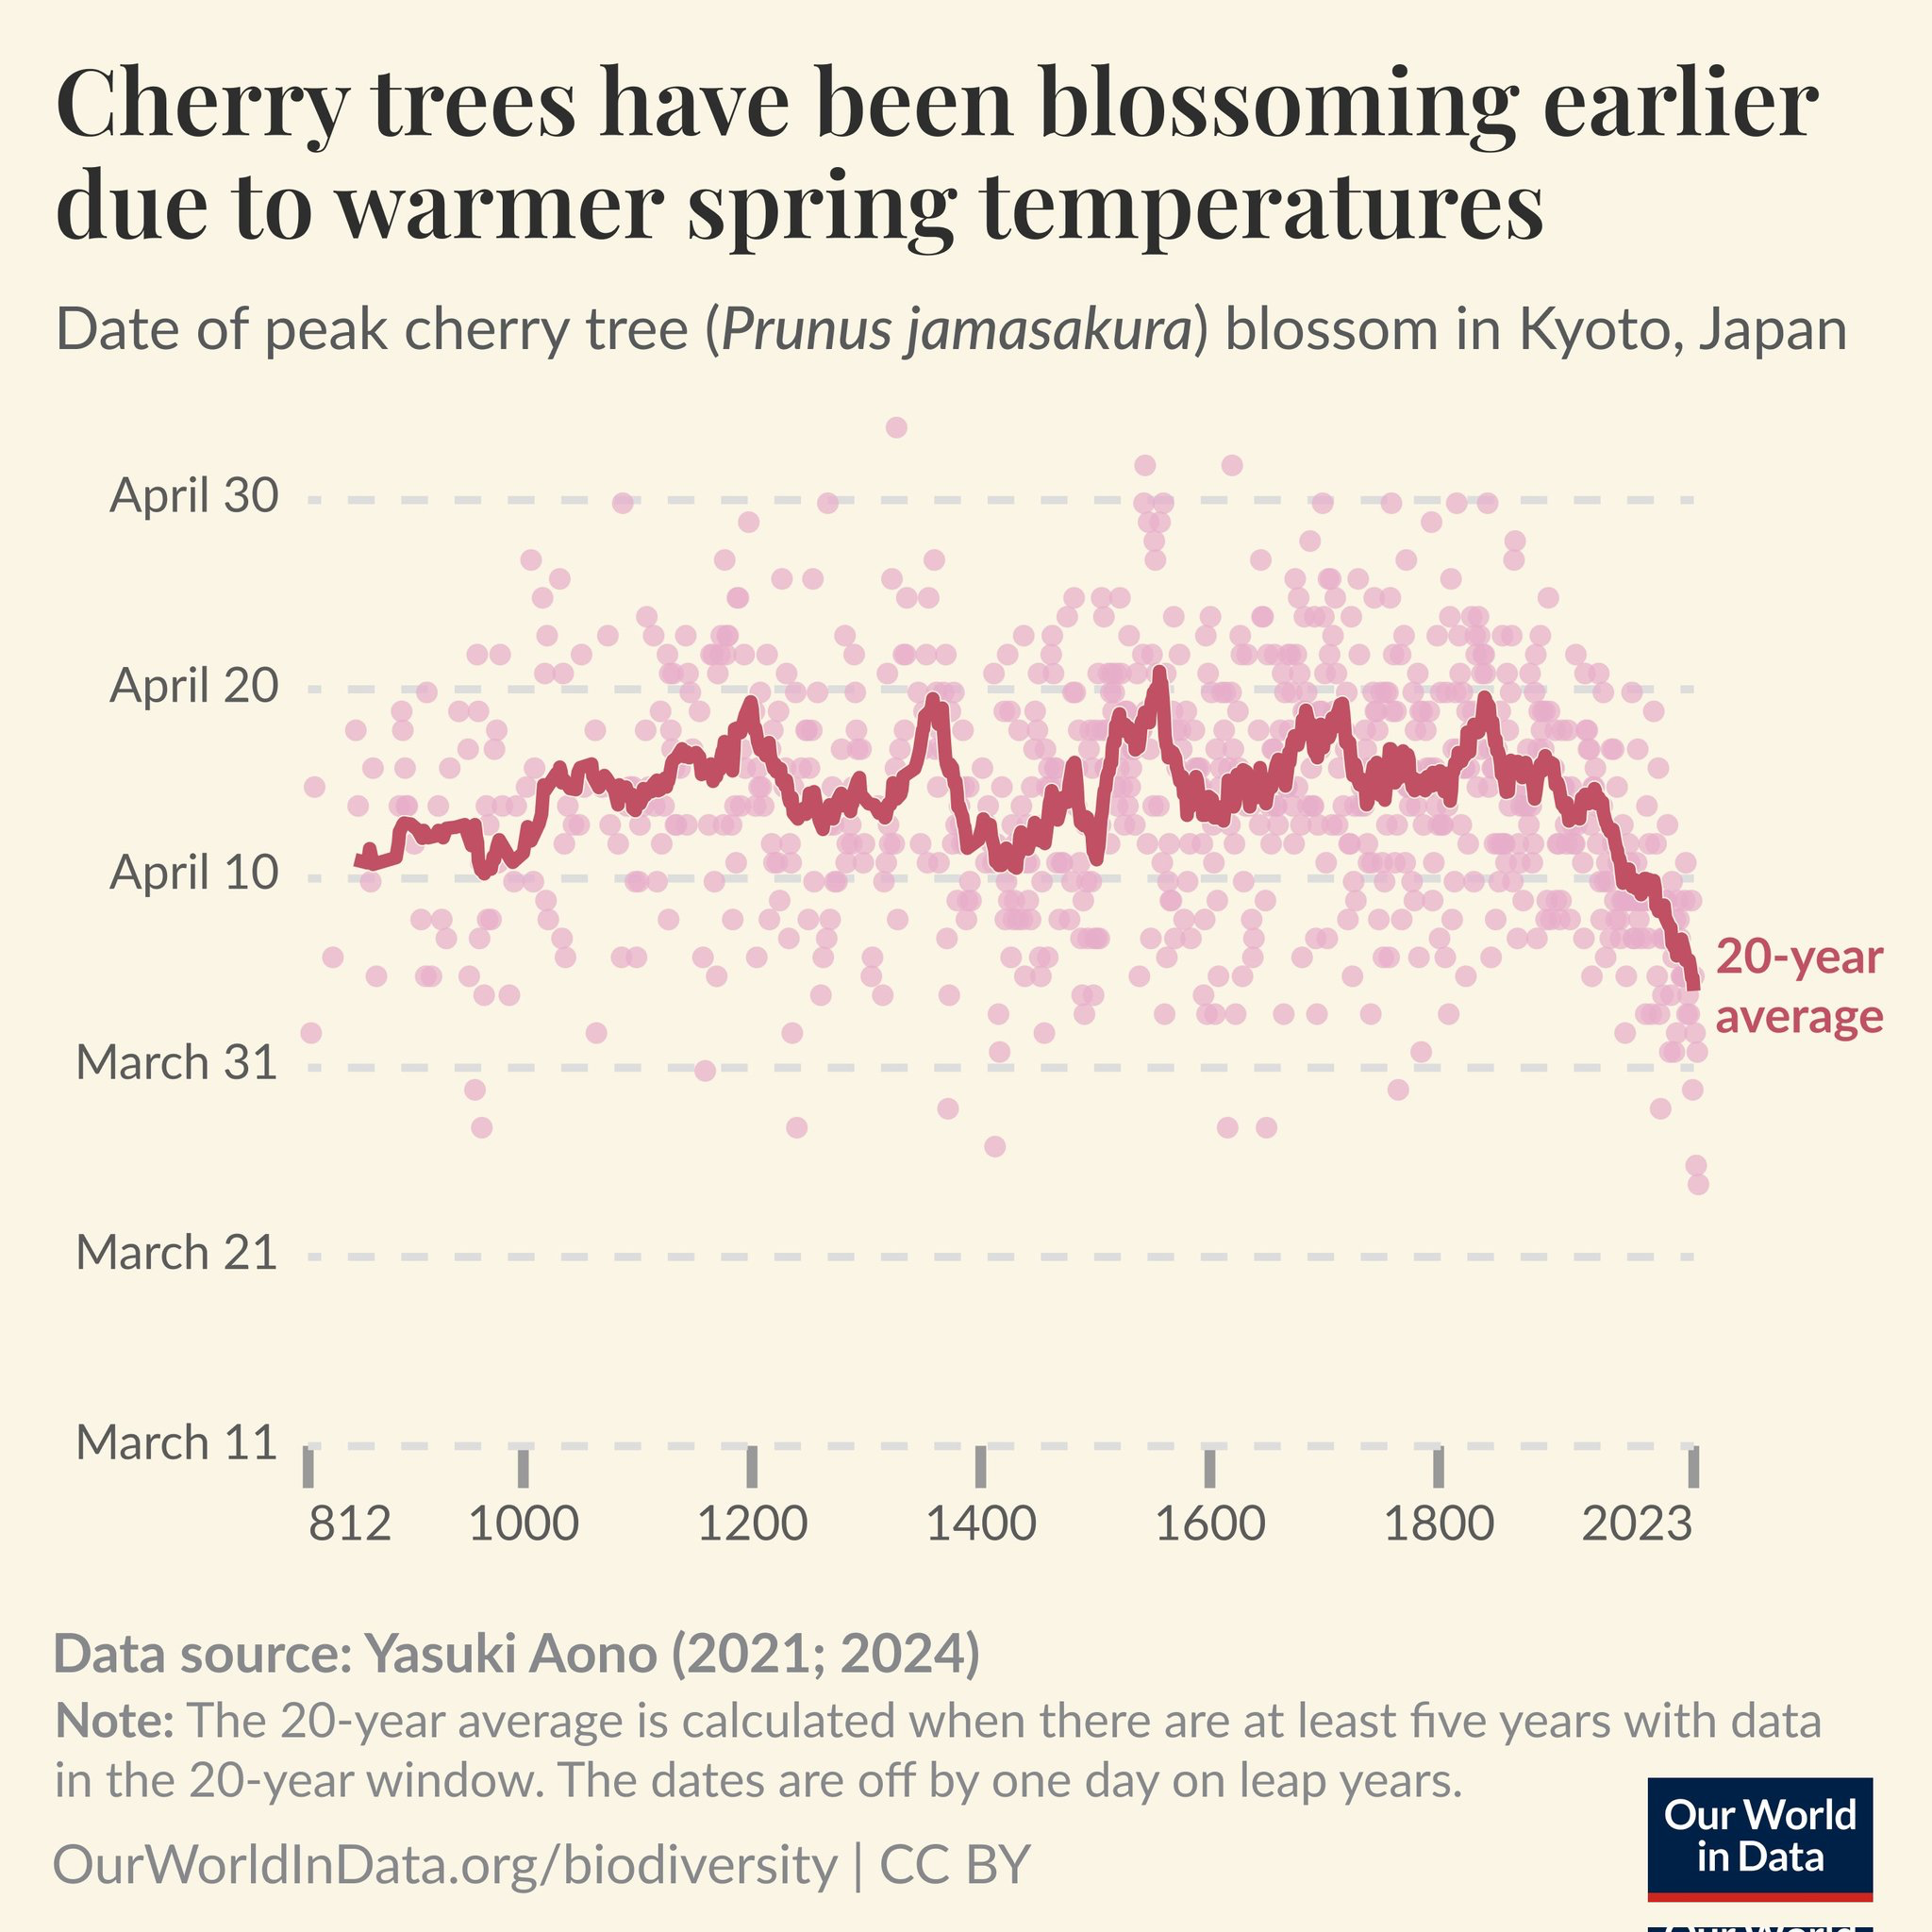 A graph showing the variation in blossoming dates for cherry tree in Kyoto. It starts in 812 and runs to 2024, and shows a sharp downward 20-year averge, implying earlier blooming in the year. The title explains this is due to warming spring temperatures.